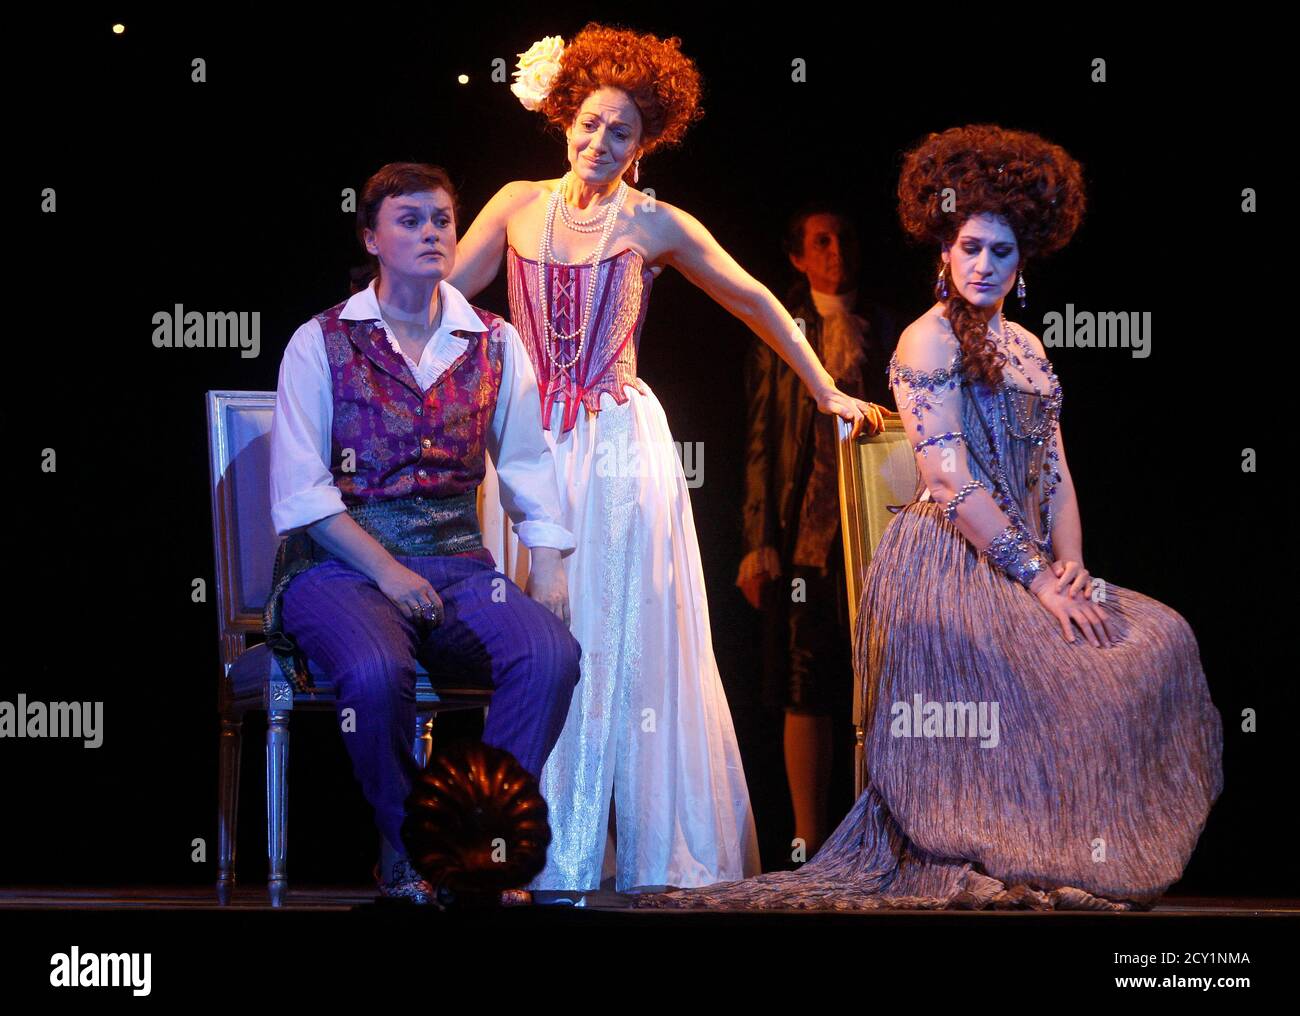 Singers Vesselina Kasarova, Veronica Cangemi and Anja Harteros (L-R) perform on stage as Ruggiero, Morgana and Alcina during a dress rehearsal of George Frideric Handel's opera 'Alcina' at the state opera house in Vienna November 10, 2010. The opera is conducted by Marc Minkowski and will premiere on November 14. REUTERS/Herwig Prammer (AUSTRIA - Tags: ENTERTAINMENT) Stock Photo